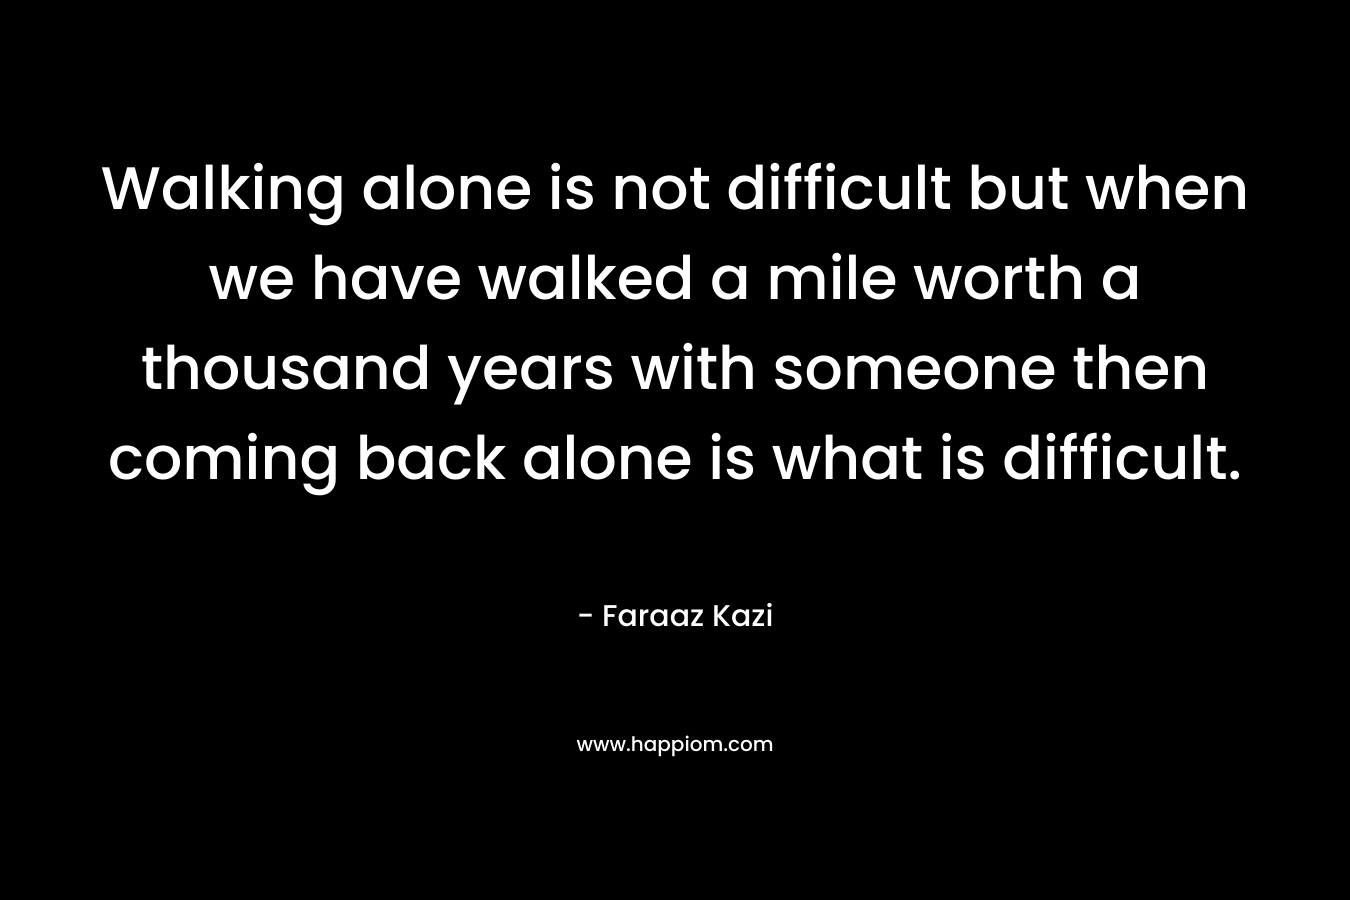 Walking alone is not difficult but when we have walked a mile worth a thousand years with someone then coming back alone is what is difficult.